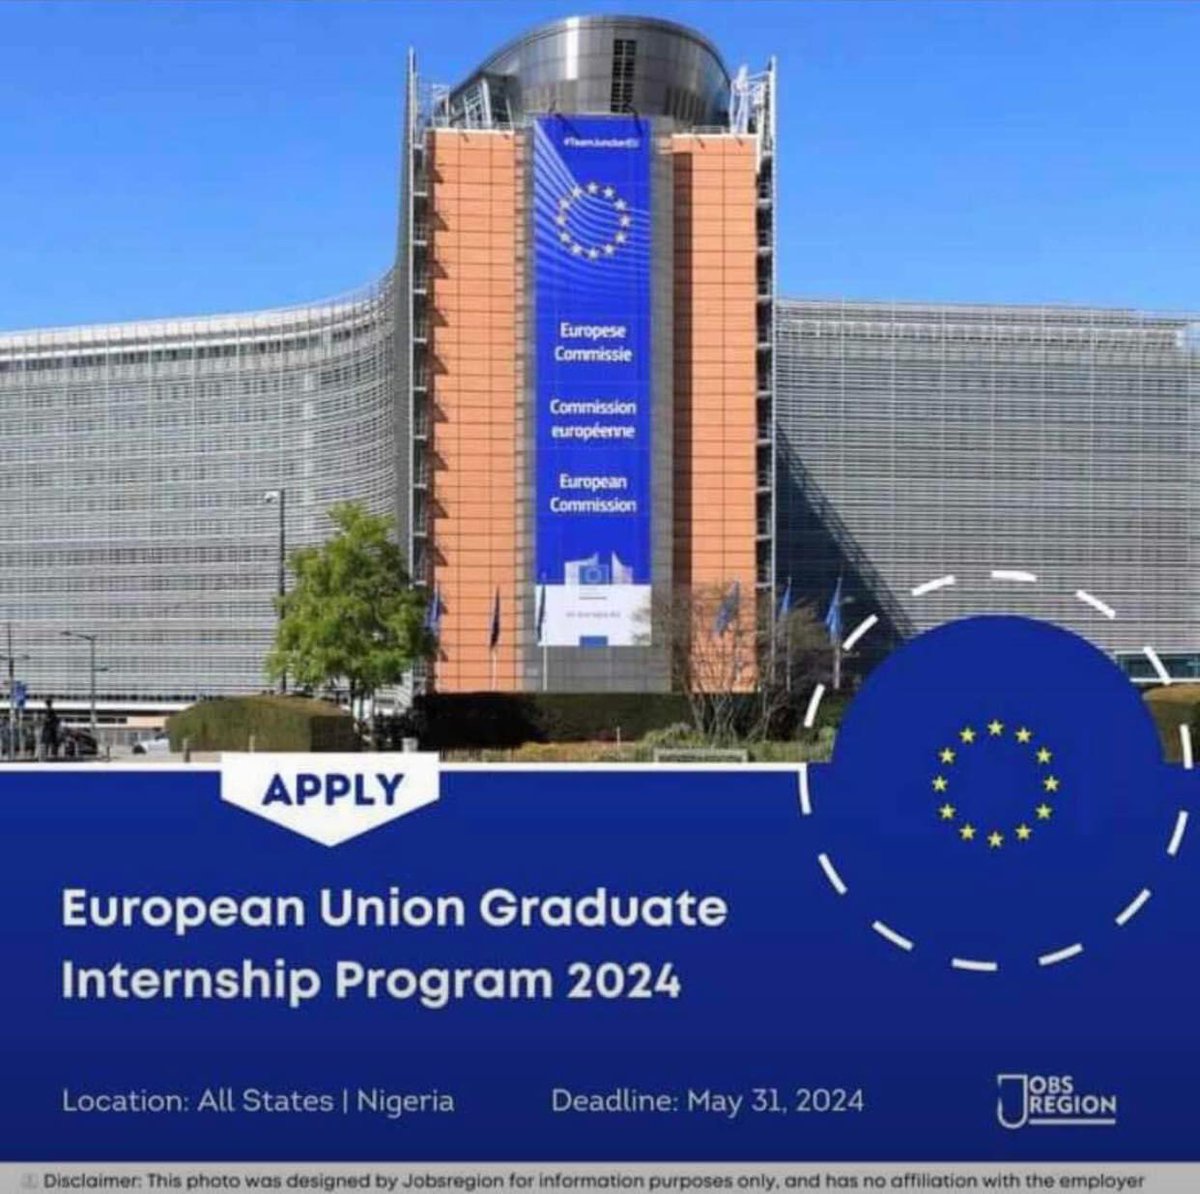 European Union Graduate Internship Program 2024 

The European Union Traineeship offers students a unique opportunity to gain firsthand experience in EU policymaking through paid placements in its offices across Europe.